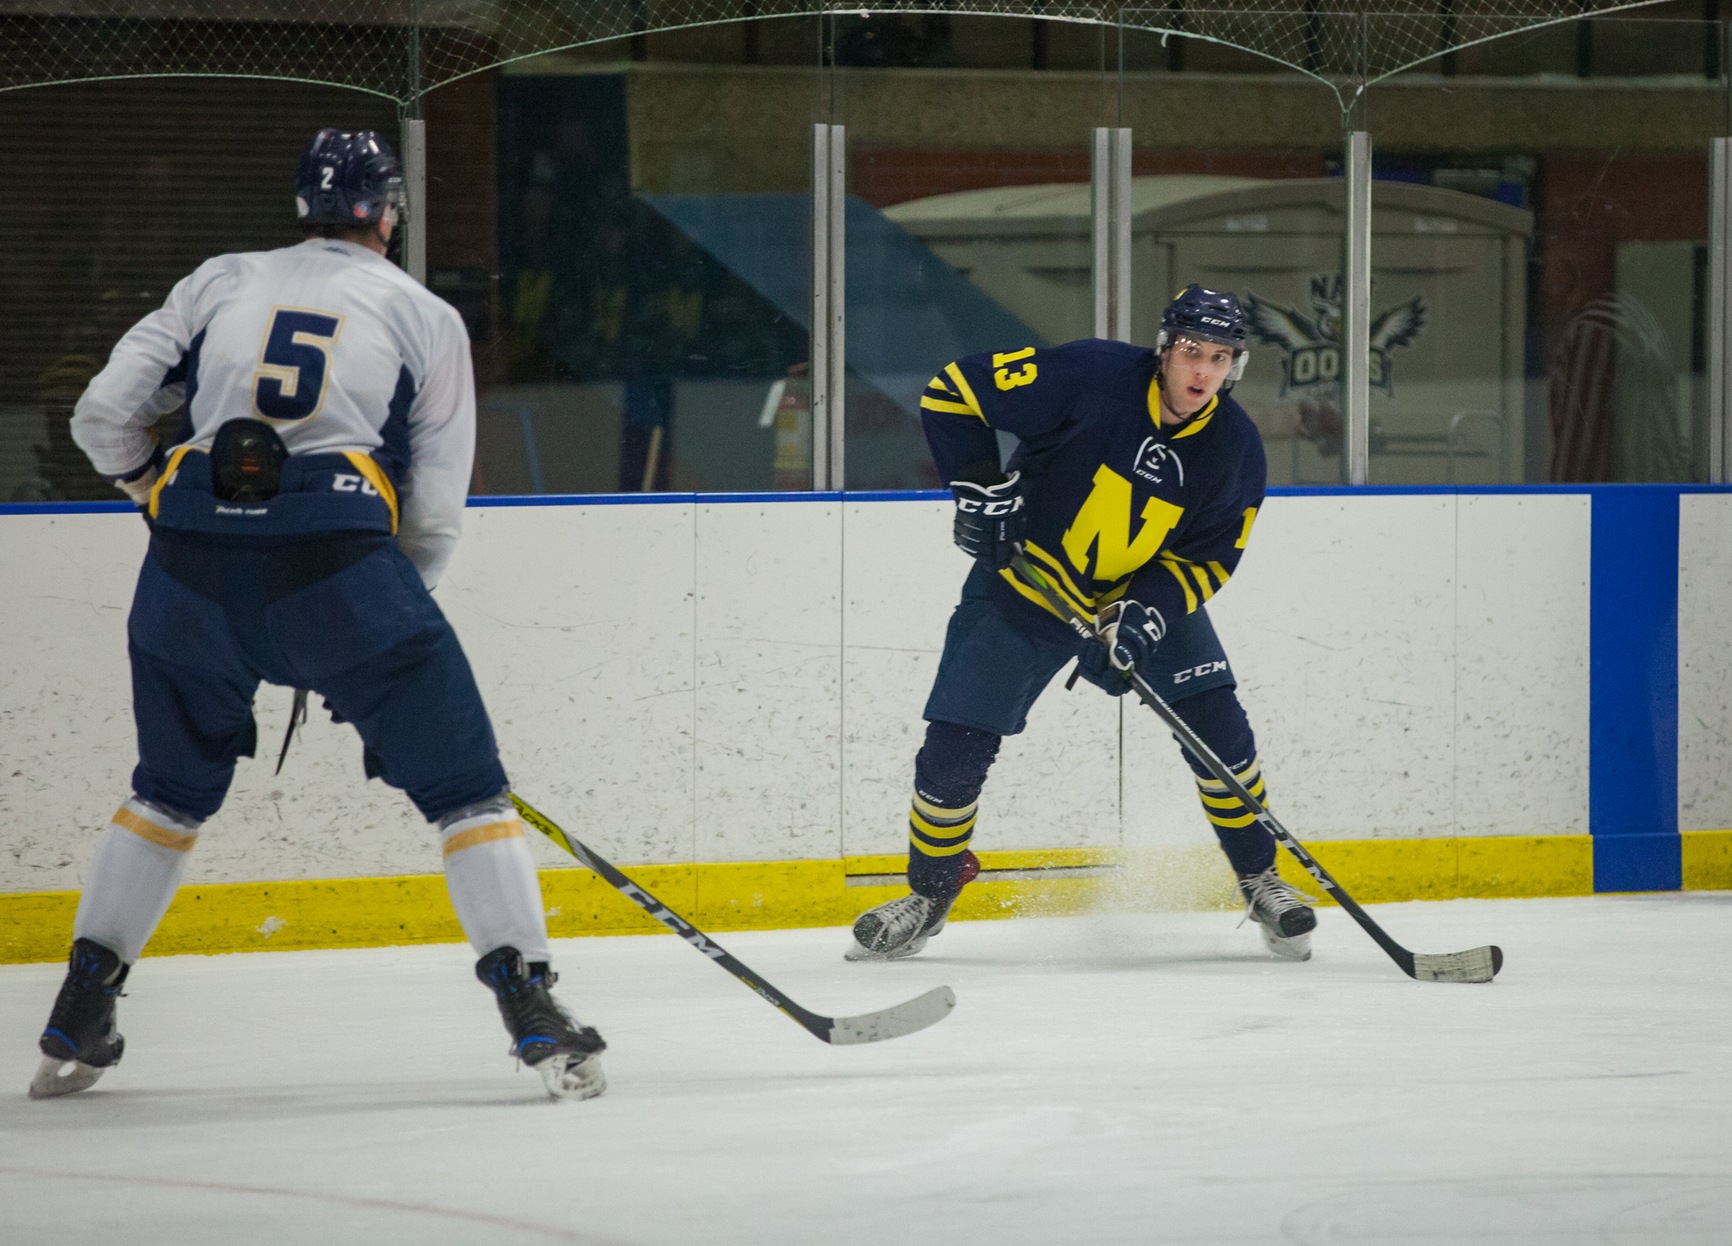 Ooks Sweep Thunder with 6-1 win.